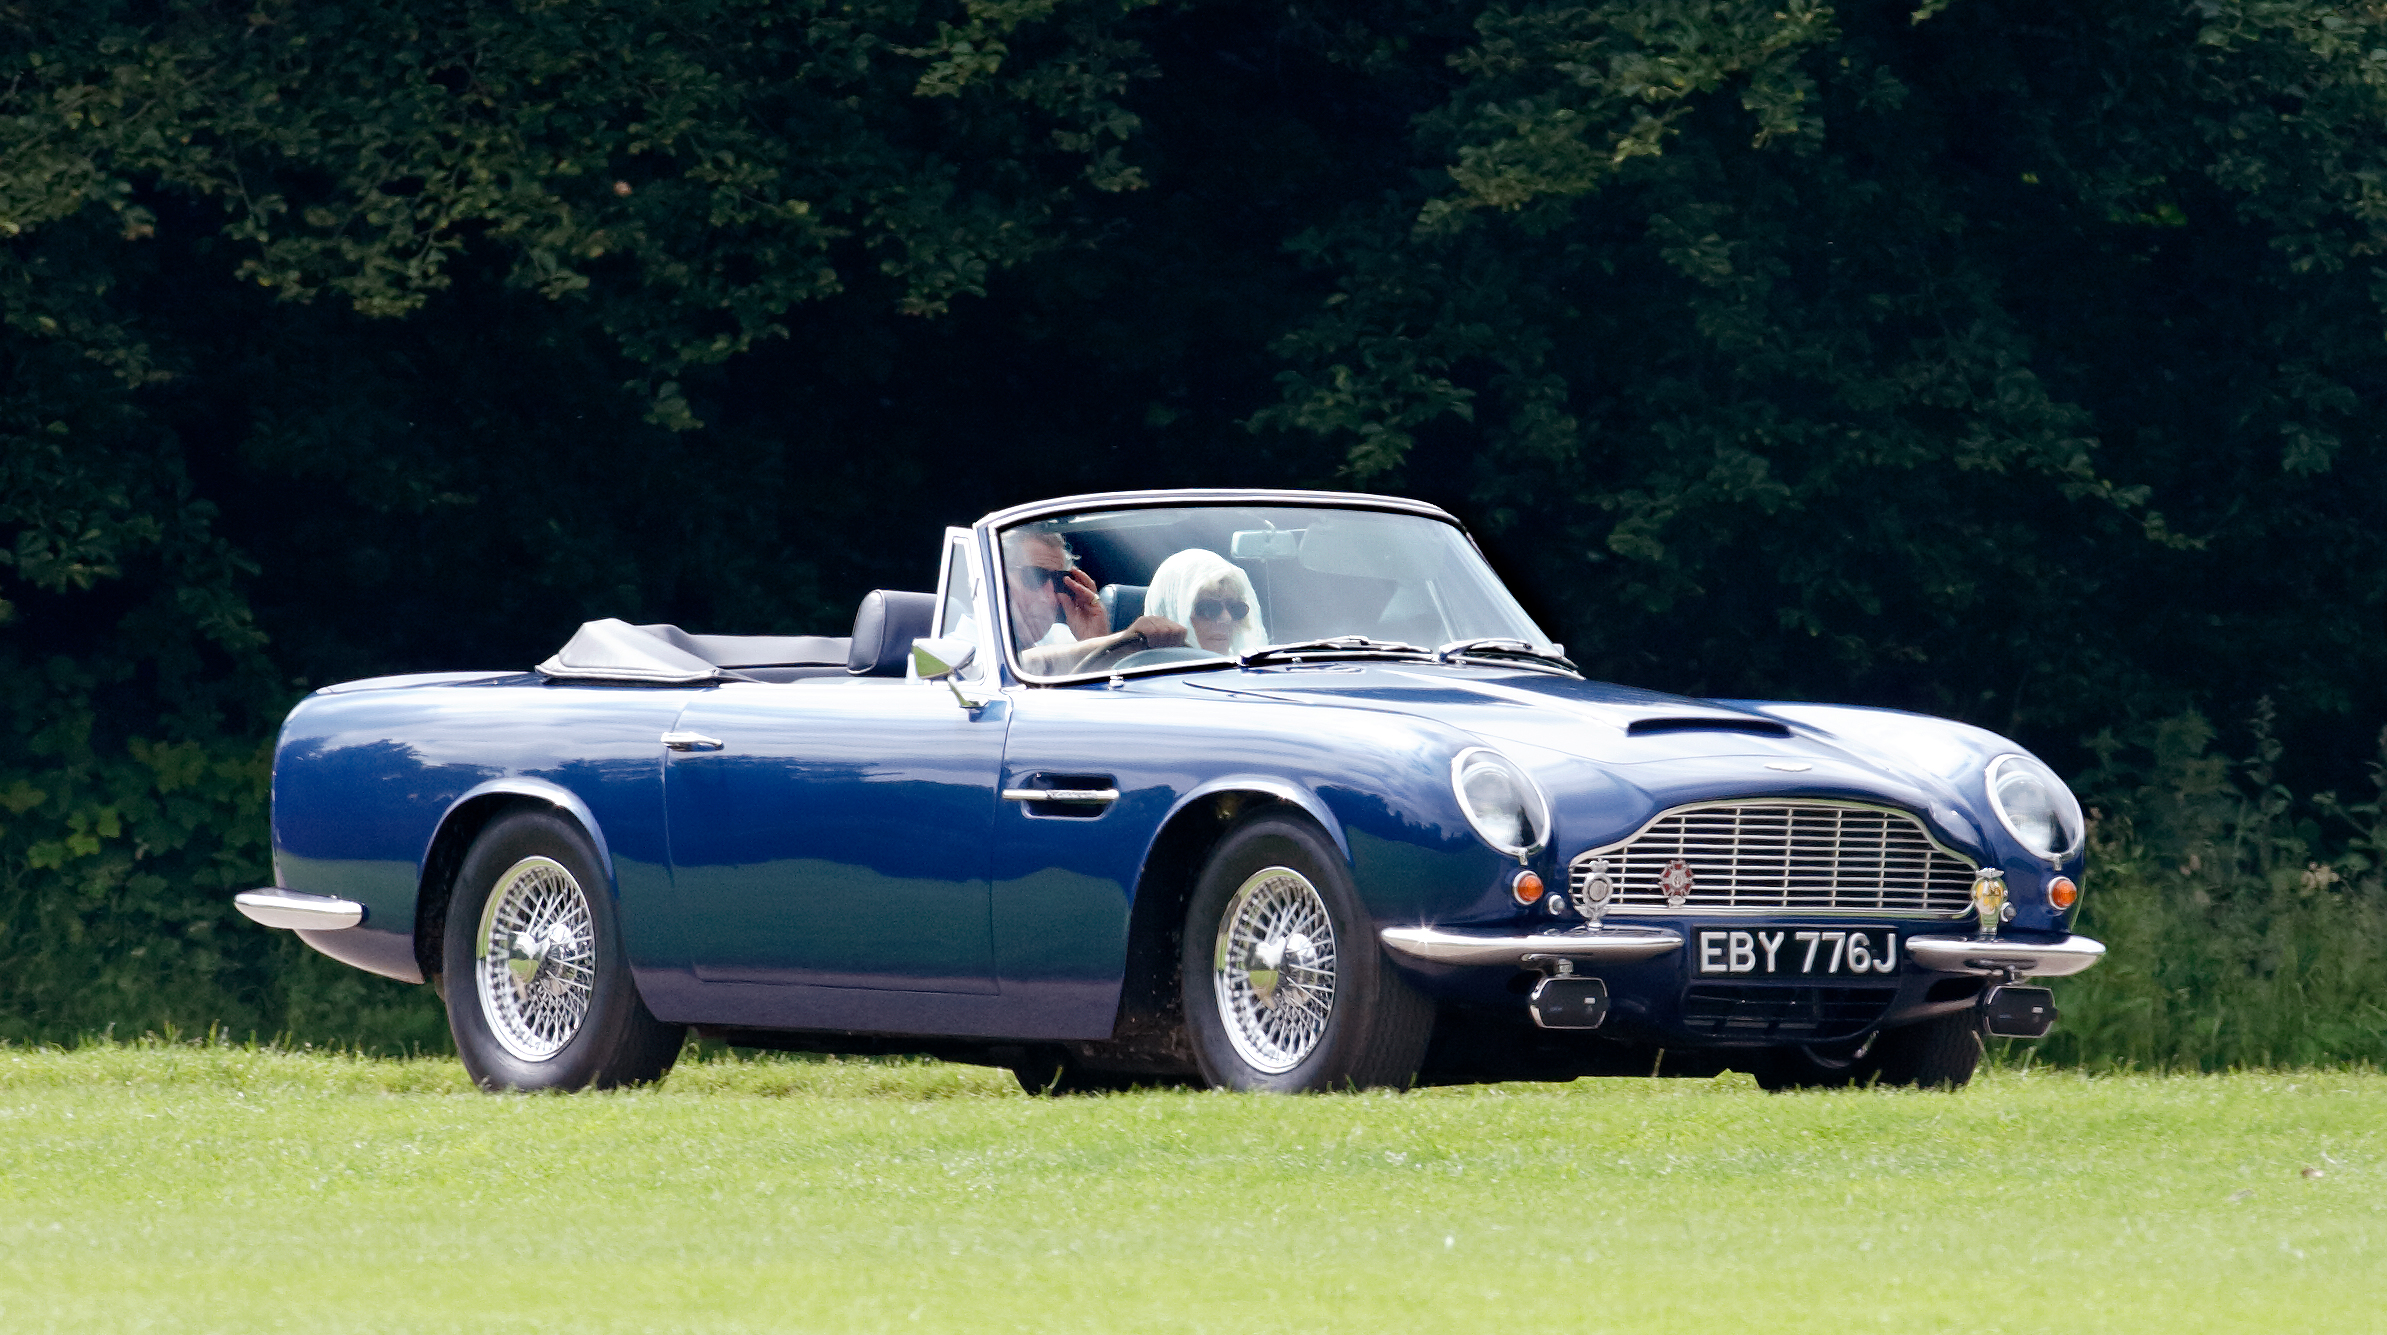 The new King of England drives an Aston Martin running on wine and cheese